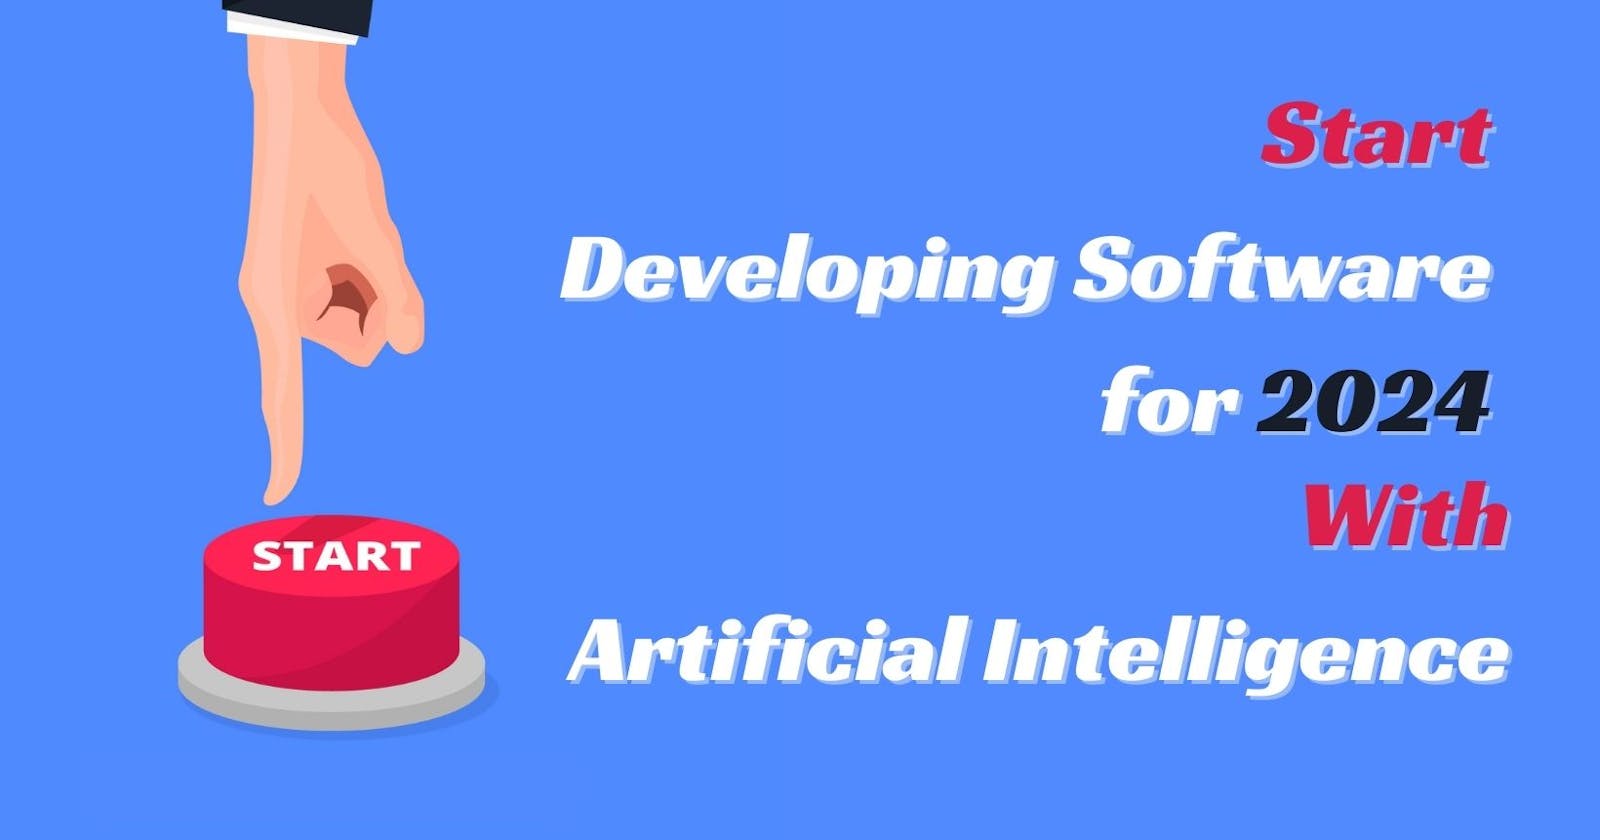 Start Developing Software for 2024 with Artificial Intelligence